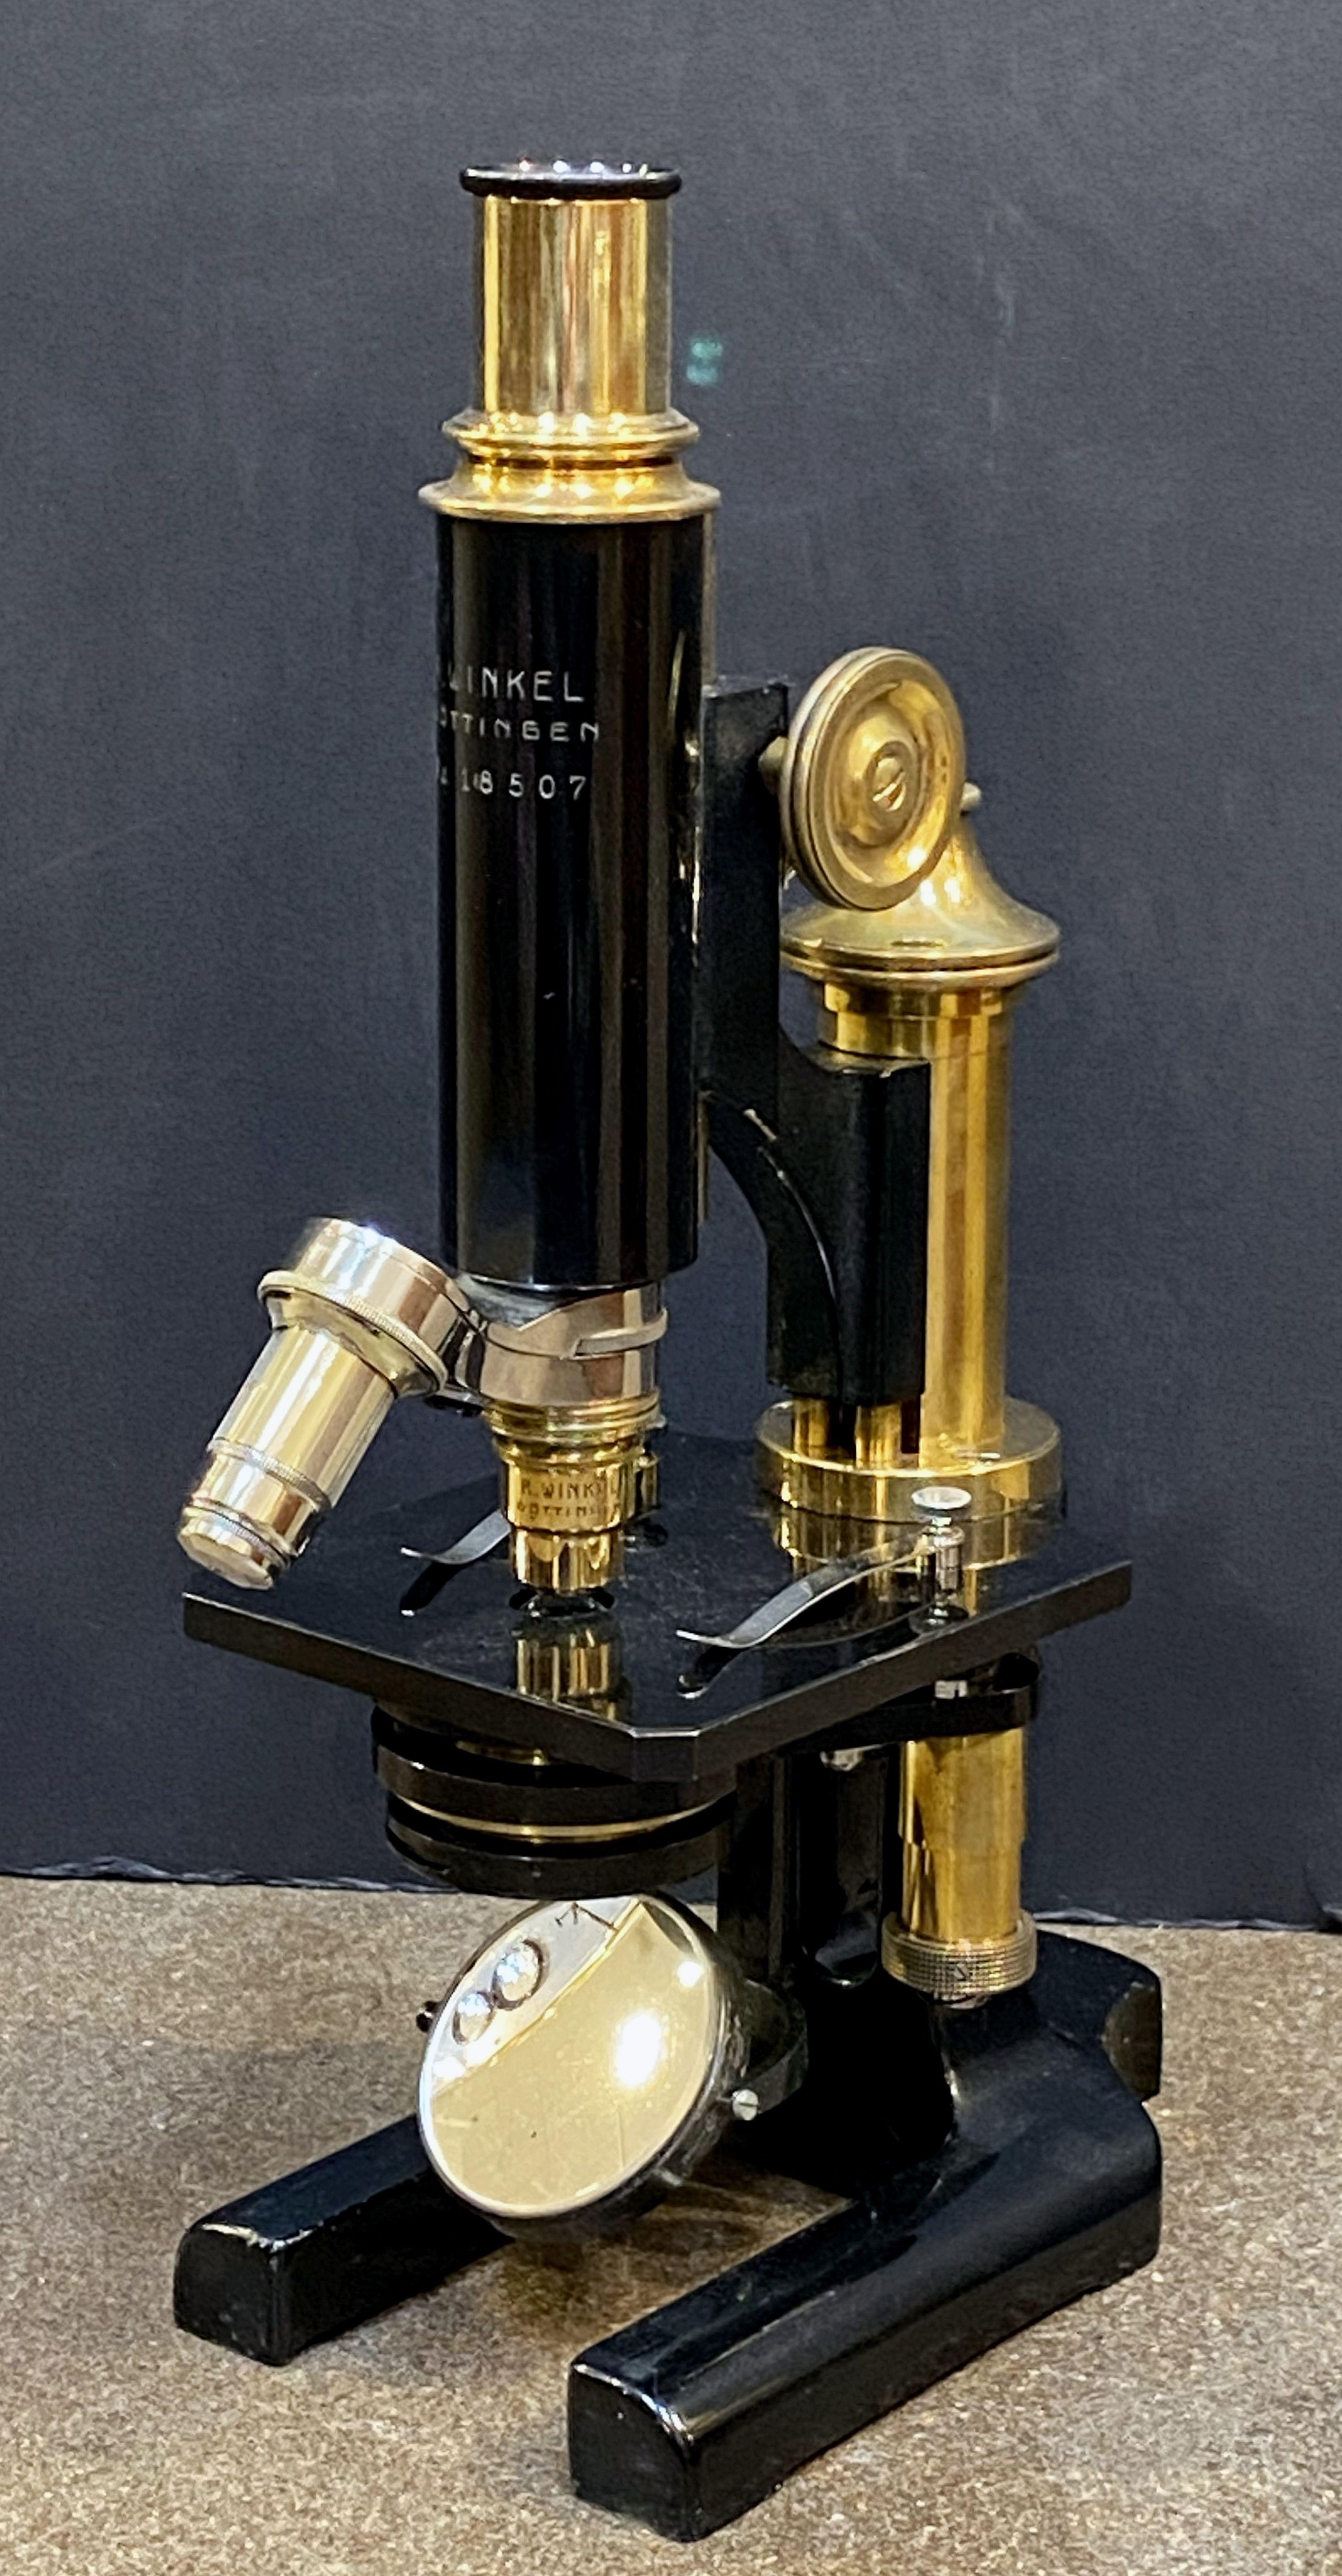 Compound Microscope with Box and Key by R. Winkel, Göttingen, Nr. 18507 For Sale 7